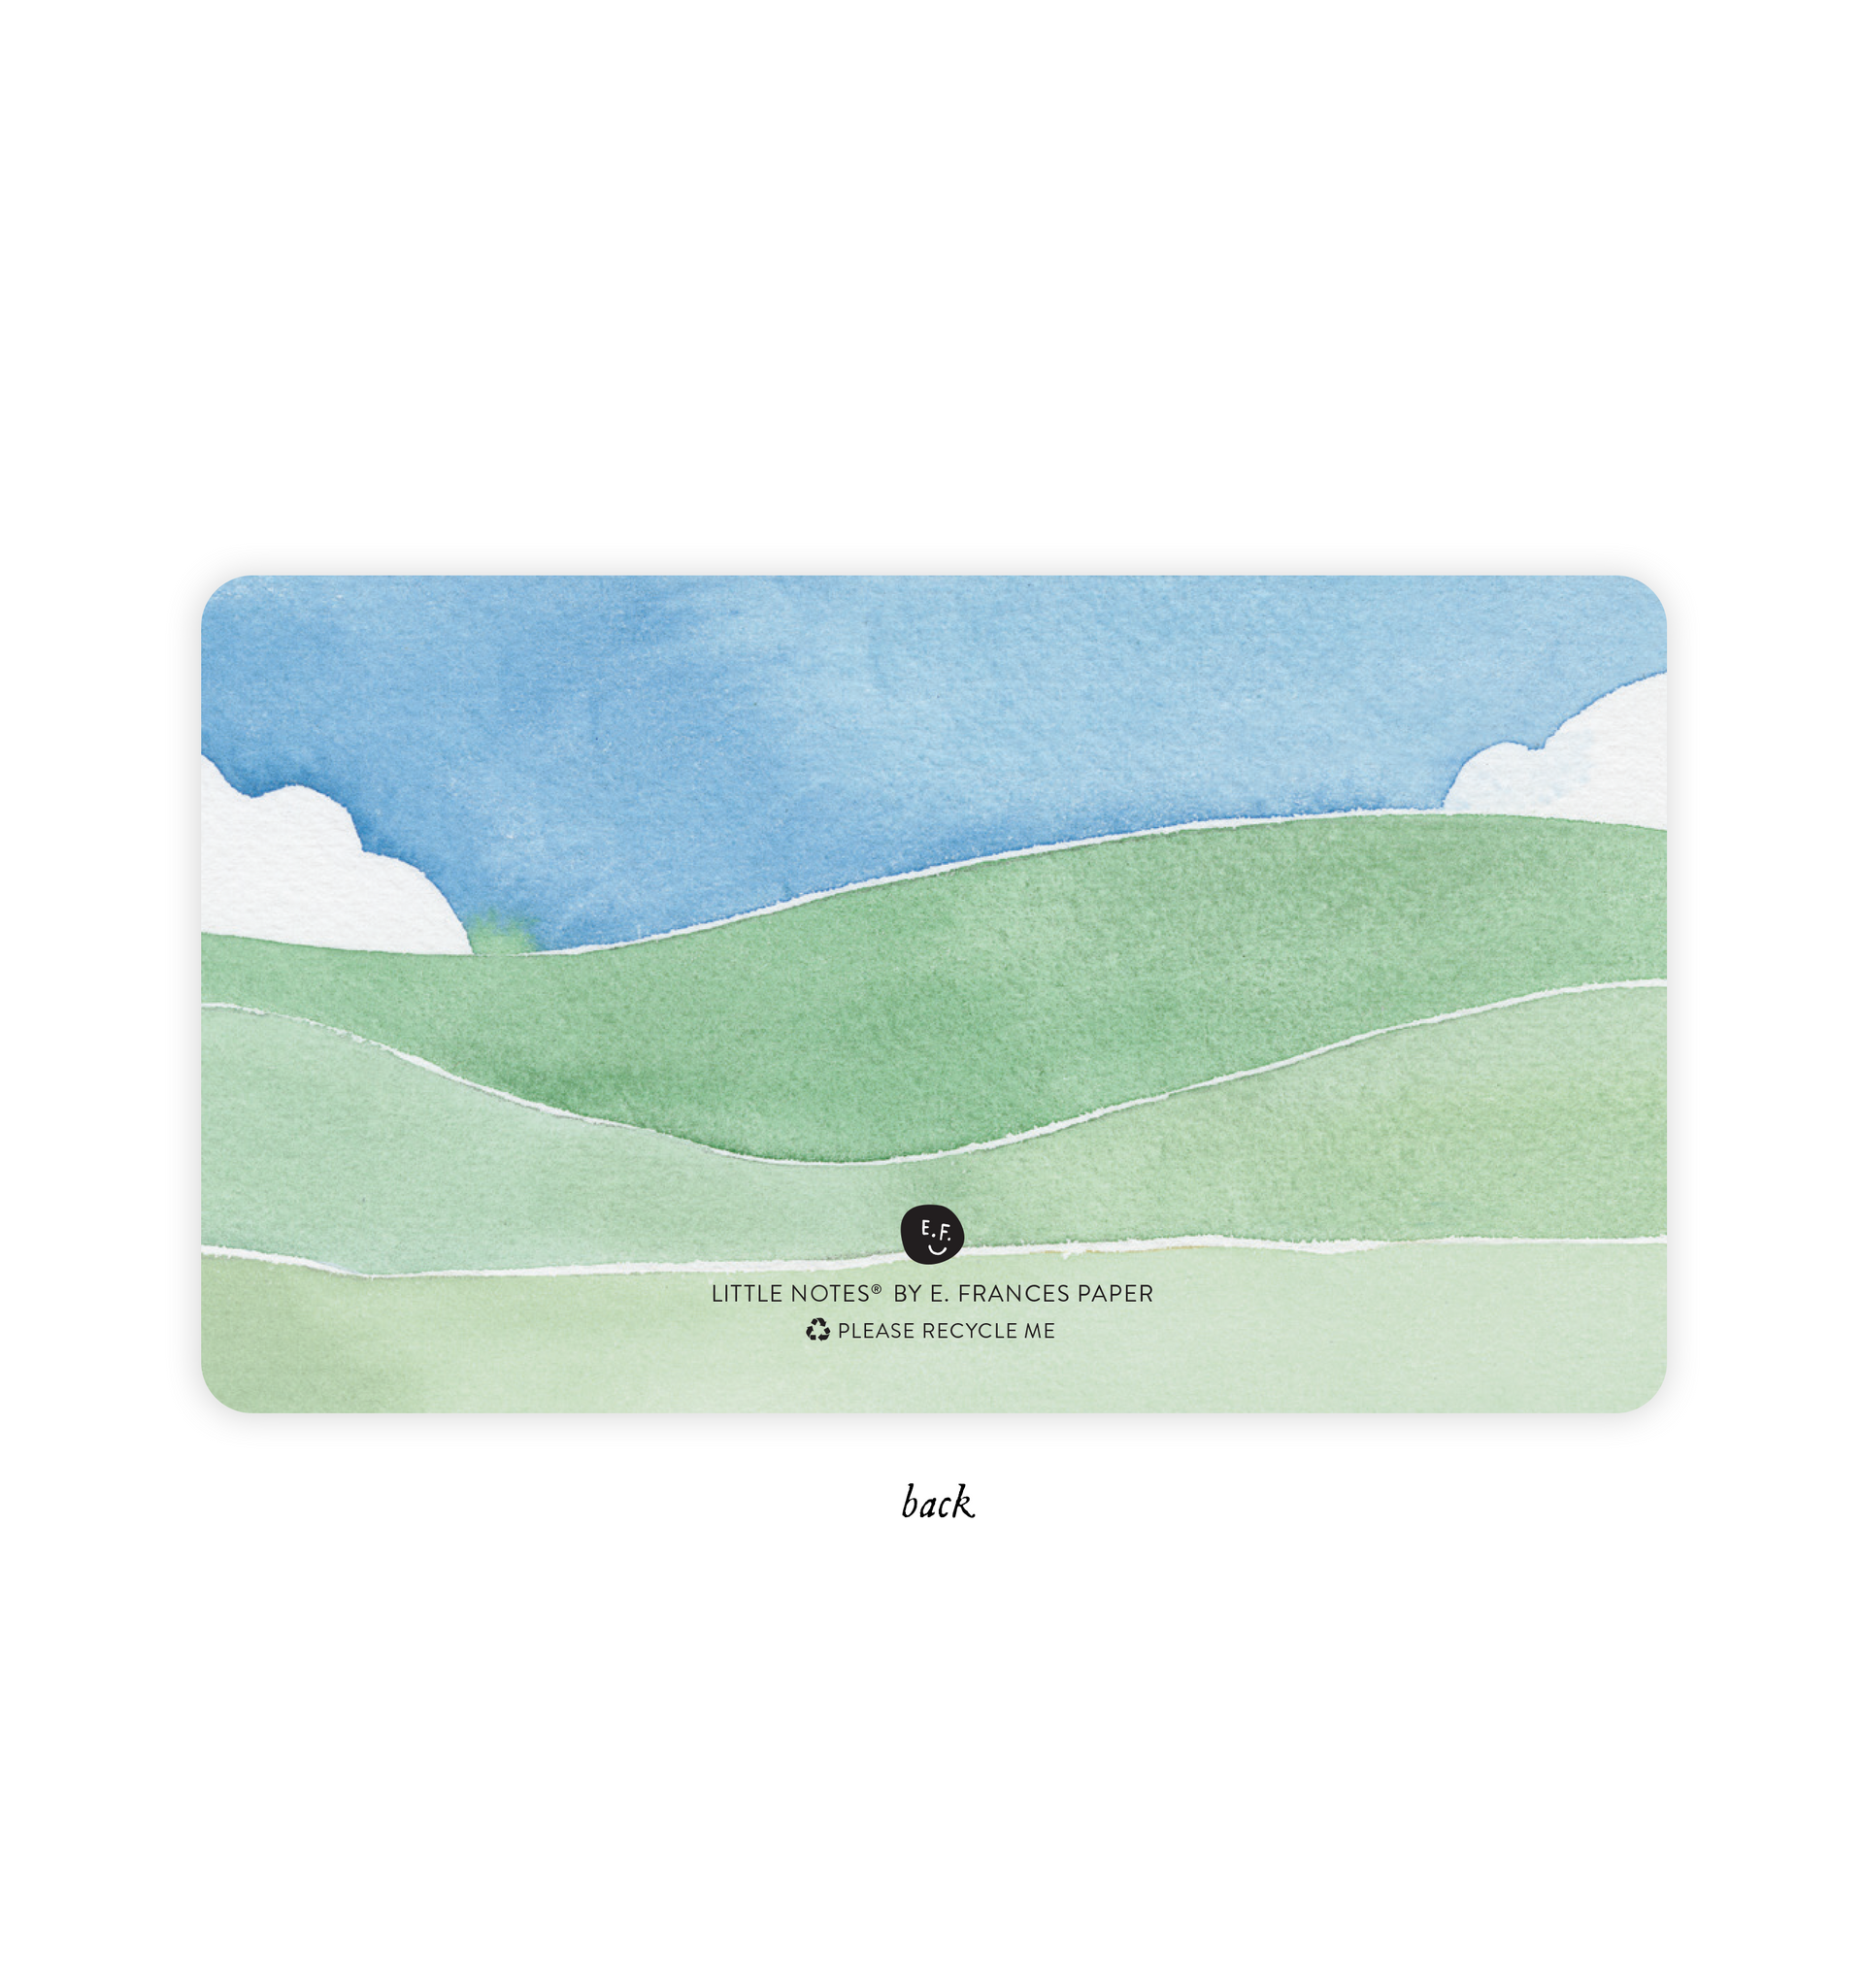 Image of back of little note with blue sky with white clouds and shades of green as rolling hills. 